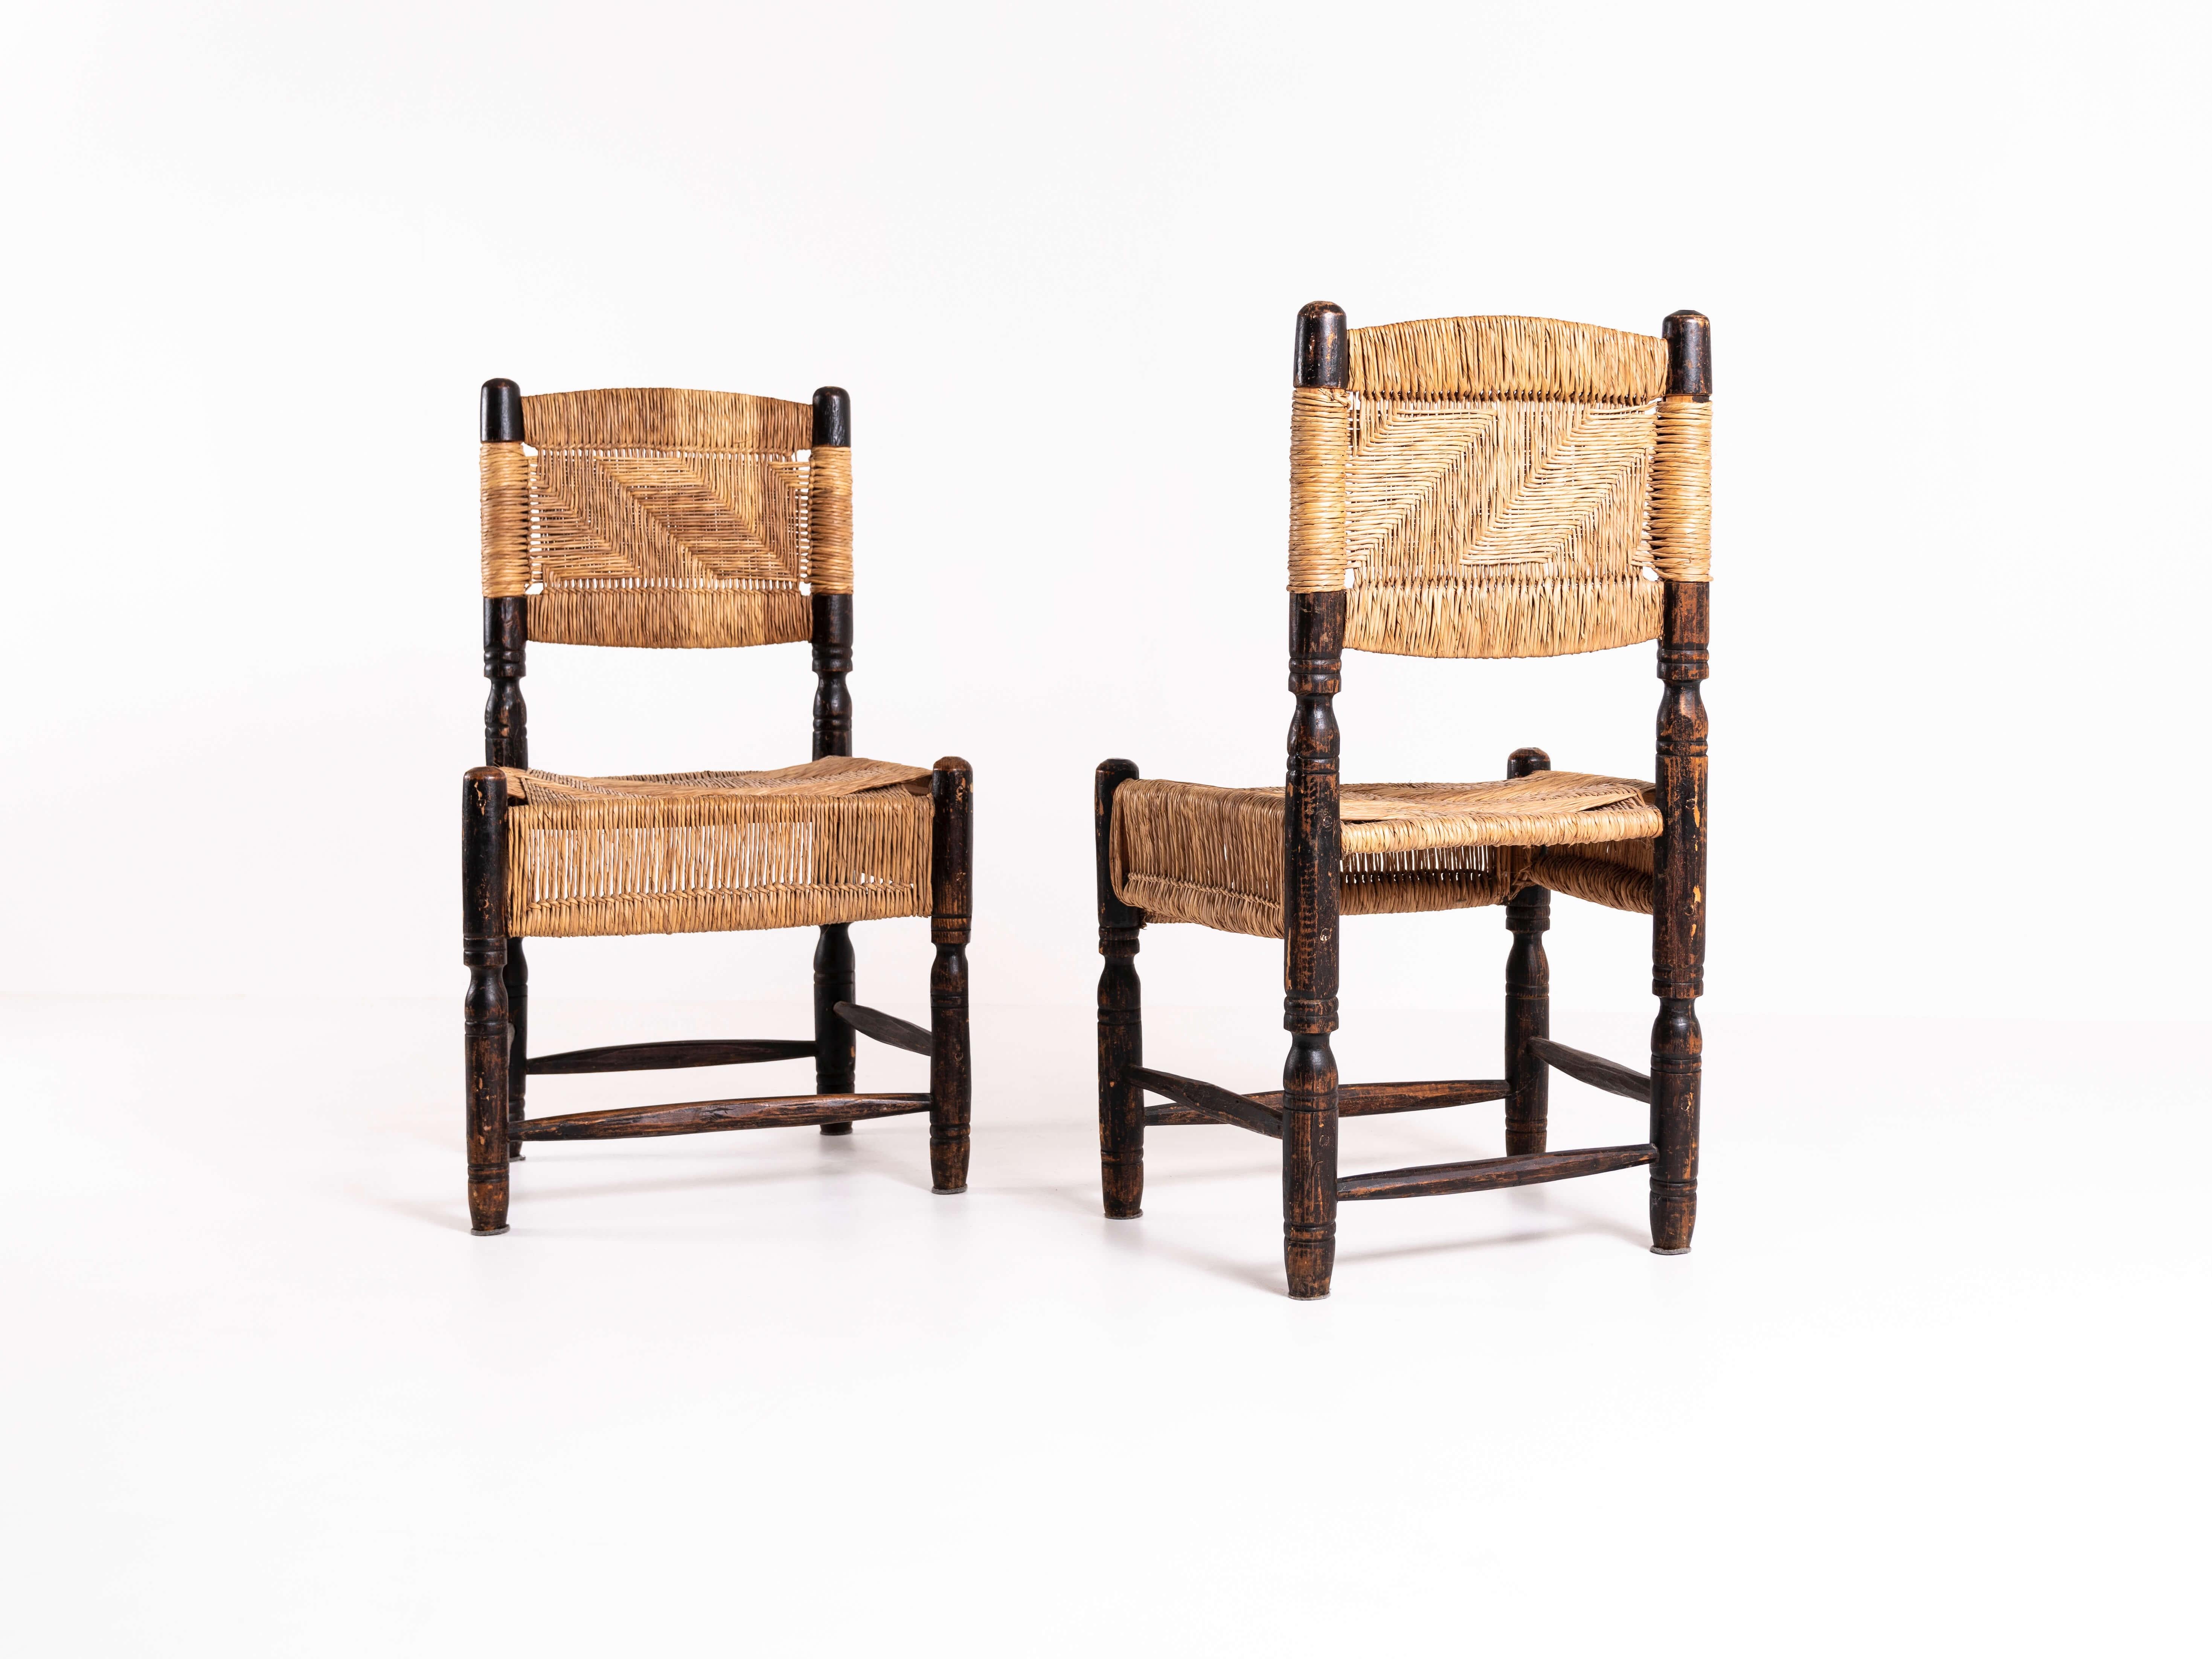 Interesting American woven chairs from ca 1940s. These chairs have the most amazing patina and we really did not want to do too much to them. They look a bit Spanish or Mexican with the robust wood and woven seats. Except for the patina, the chairs